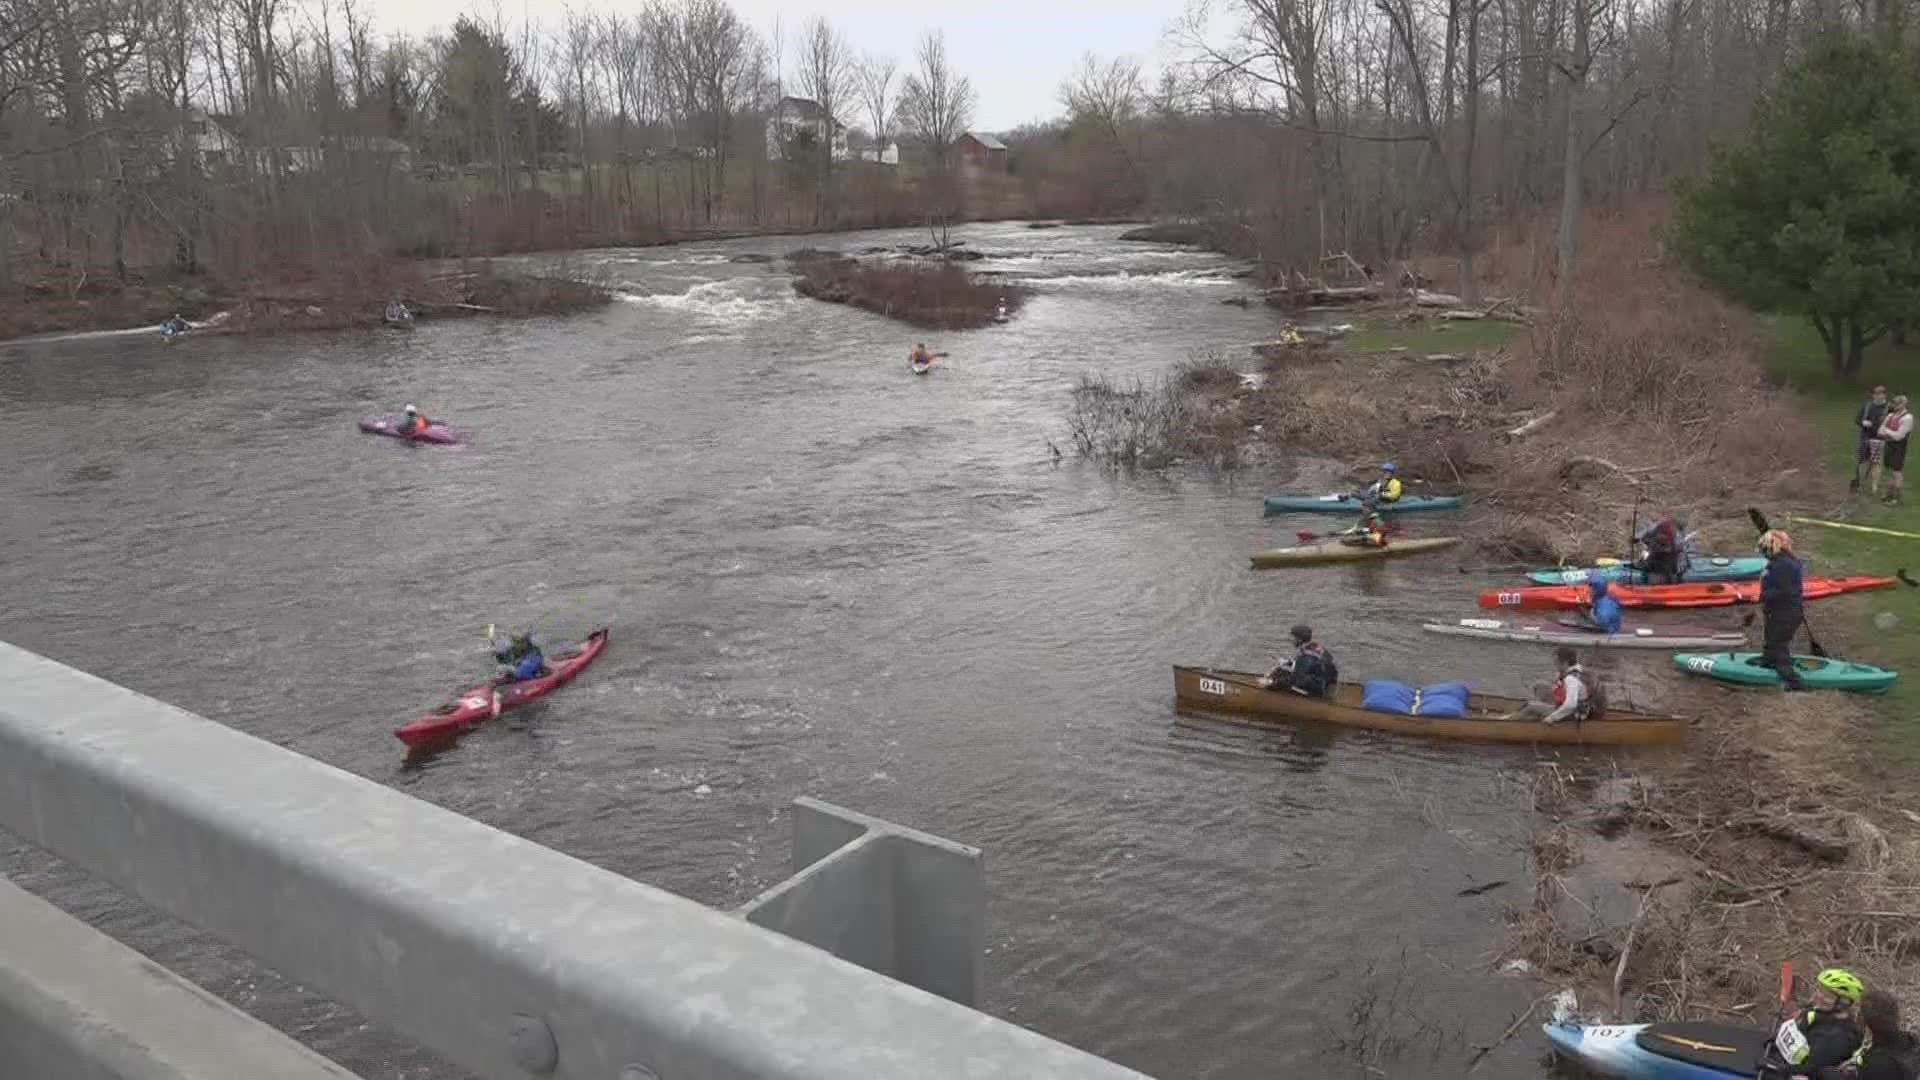 Hundreds showed up for the 55th annual Kenduskeag Stream Canoe race on Saturday.